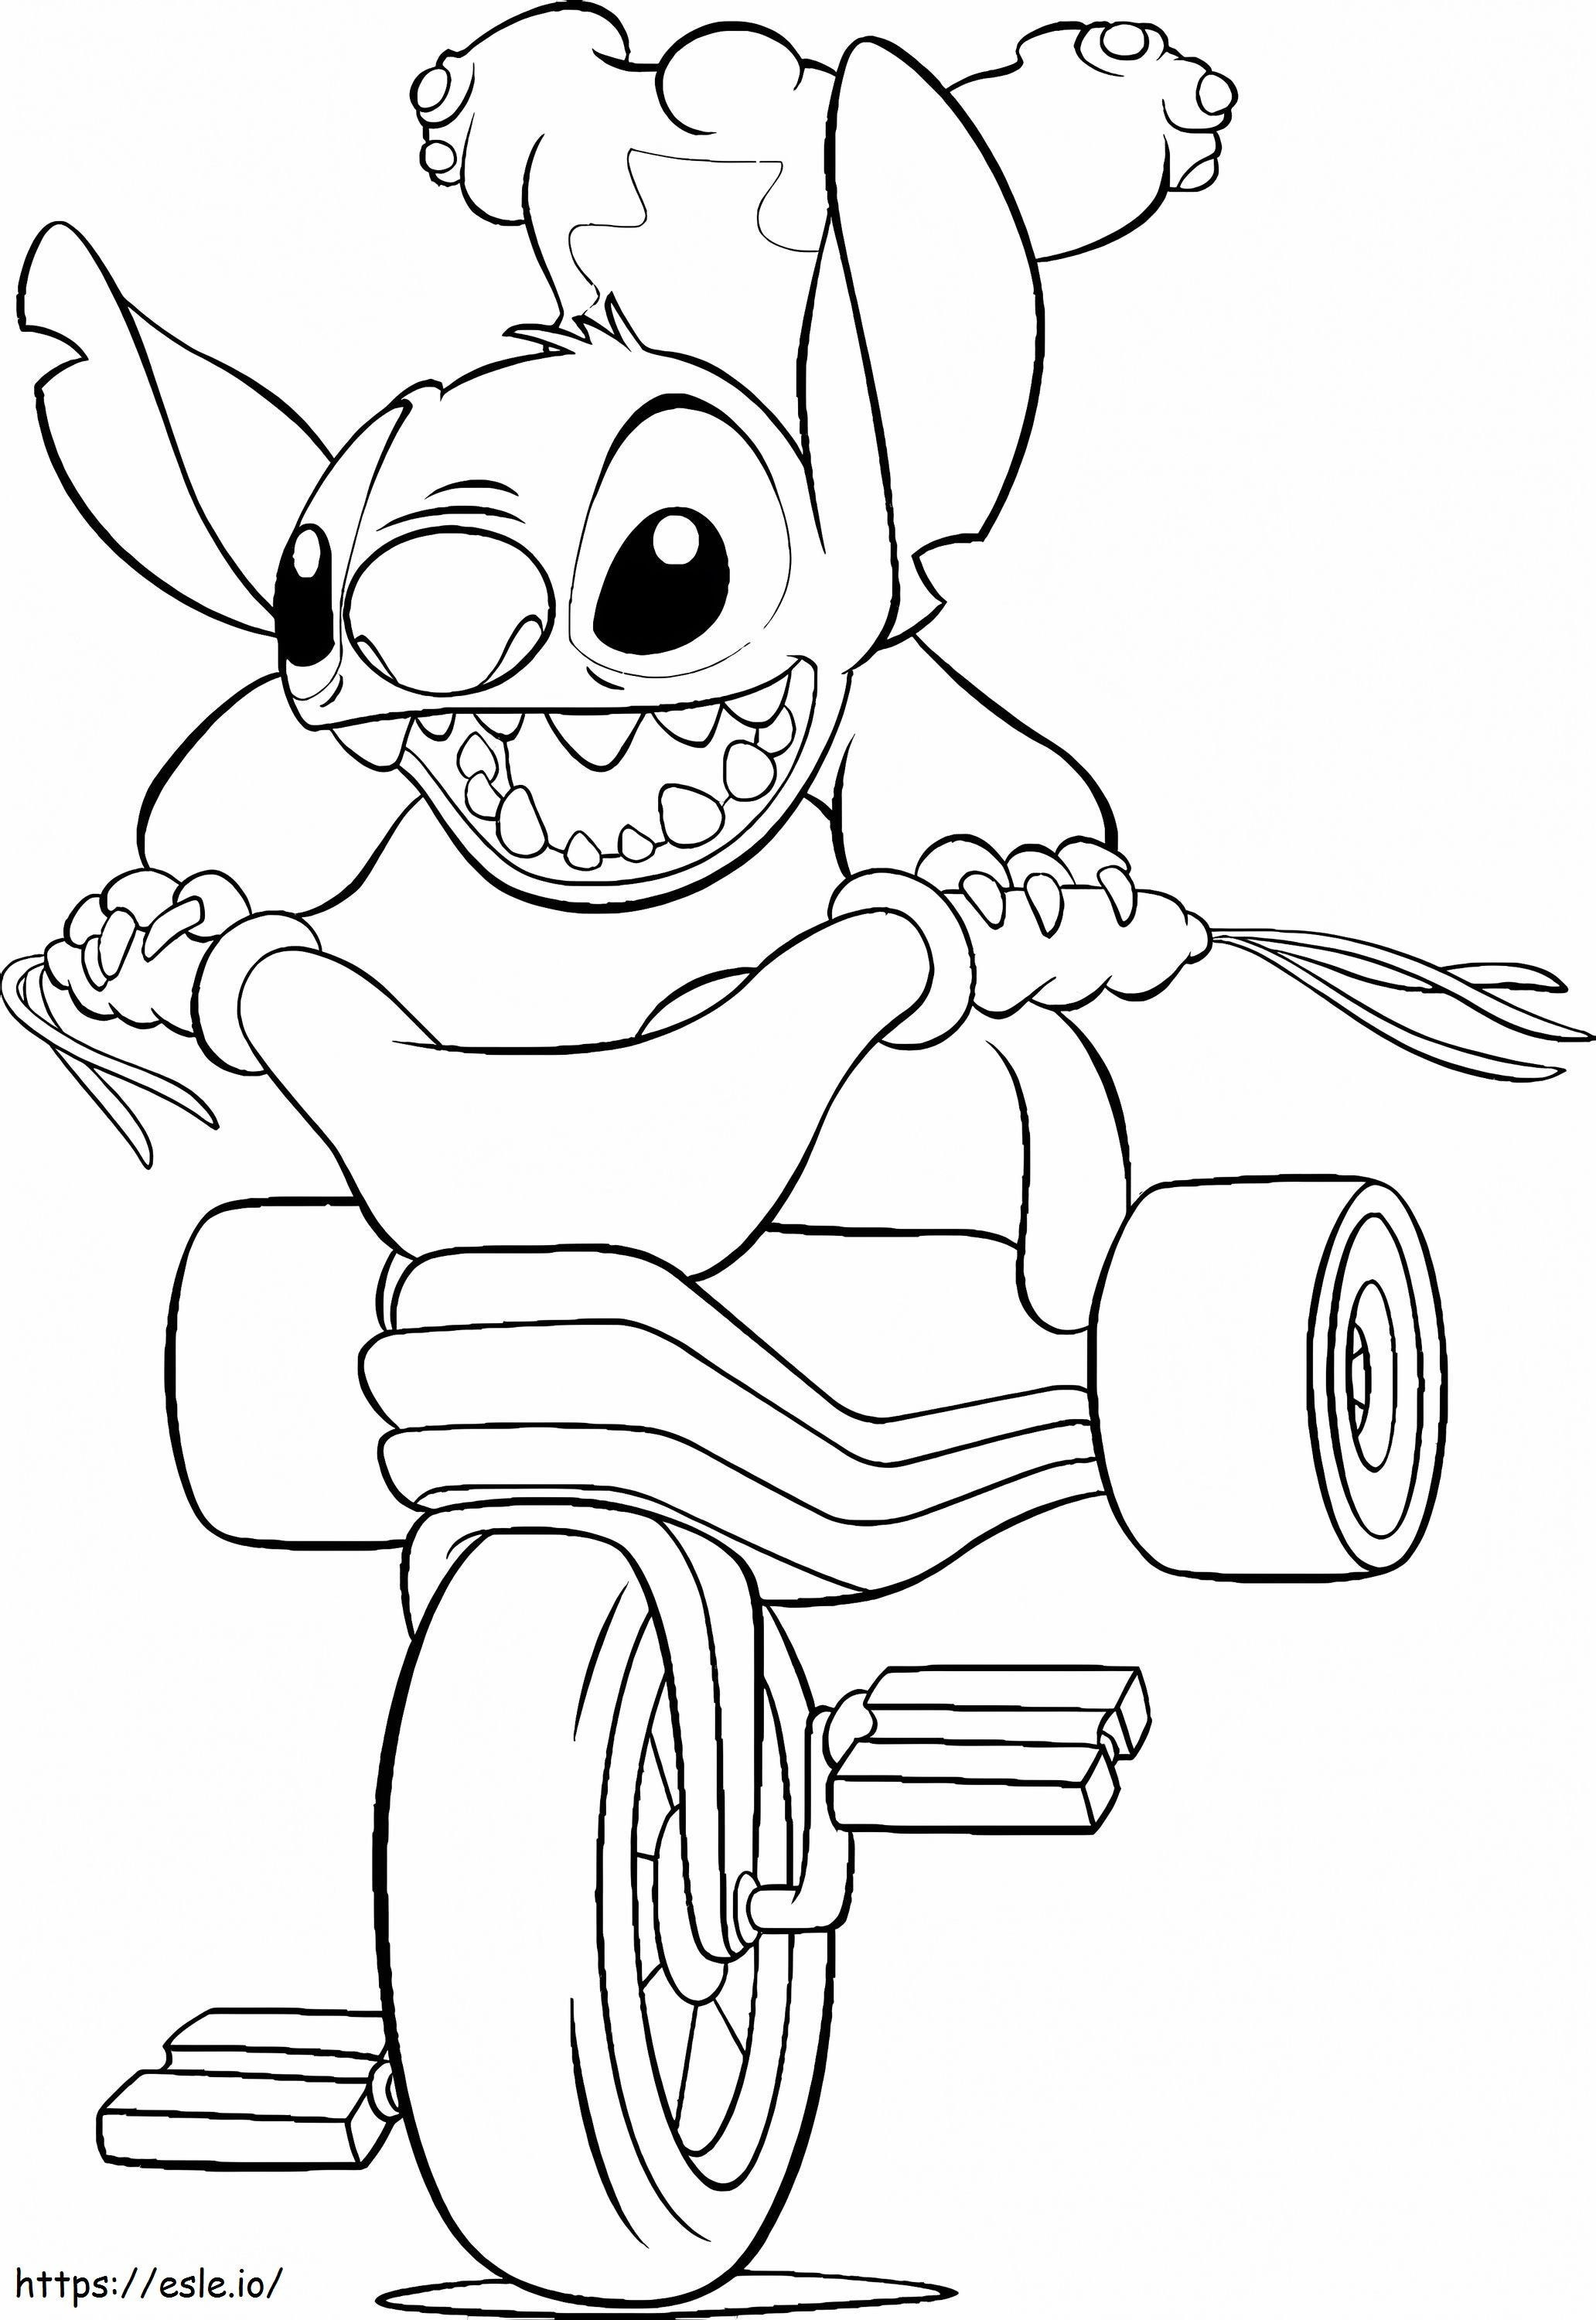 Stitch 6 coloring page